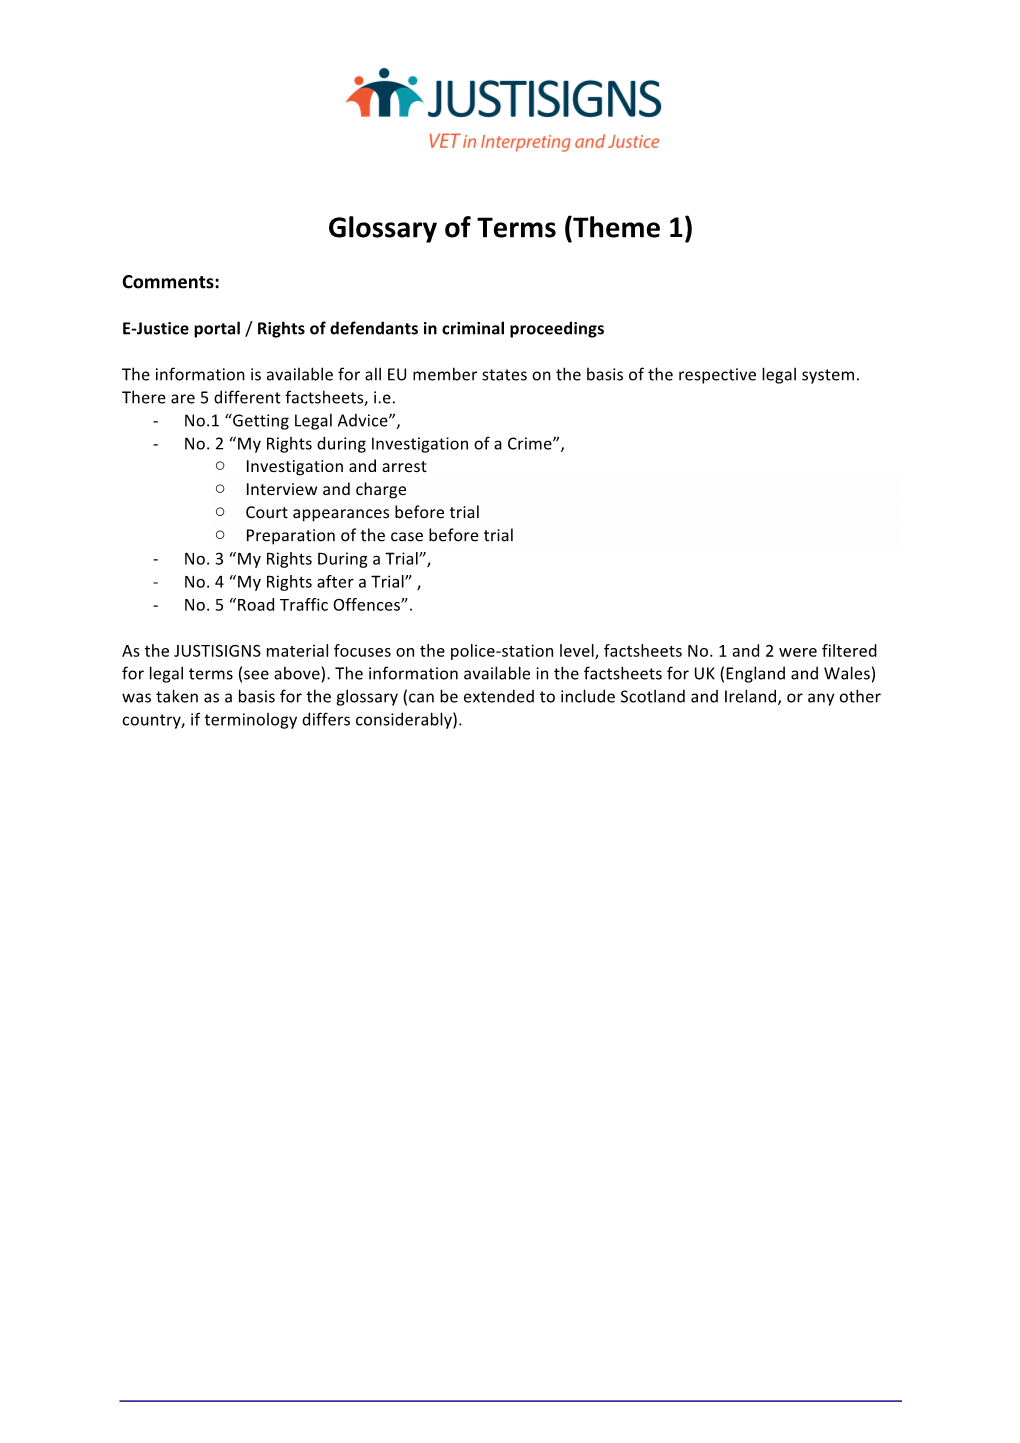 Theme 1 Glossary of Legal Terms FINAL